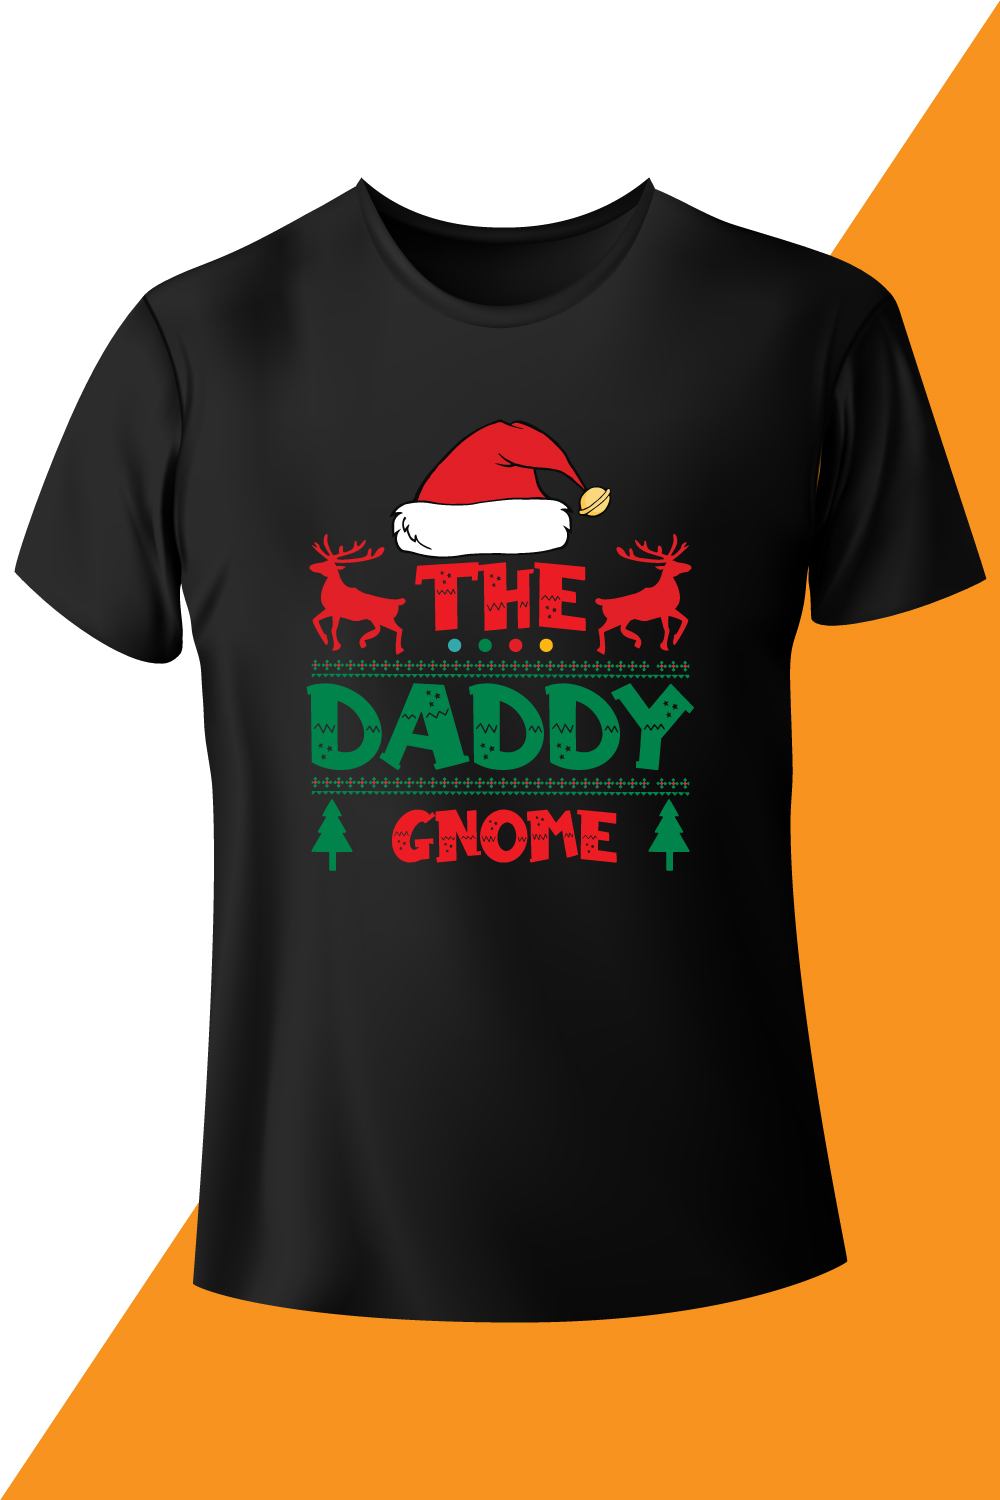 Image of a black t-shirt with a unique slogan The daddy gnome.